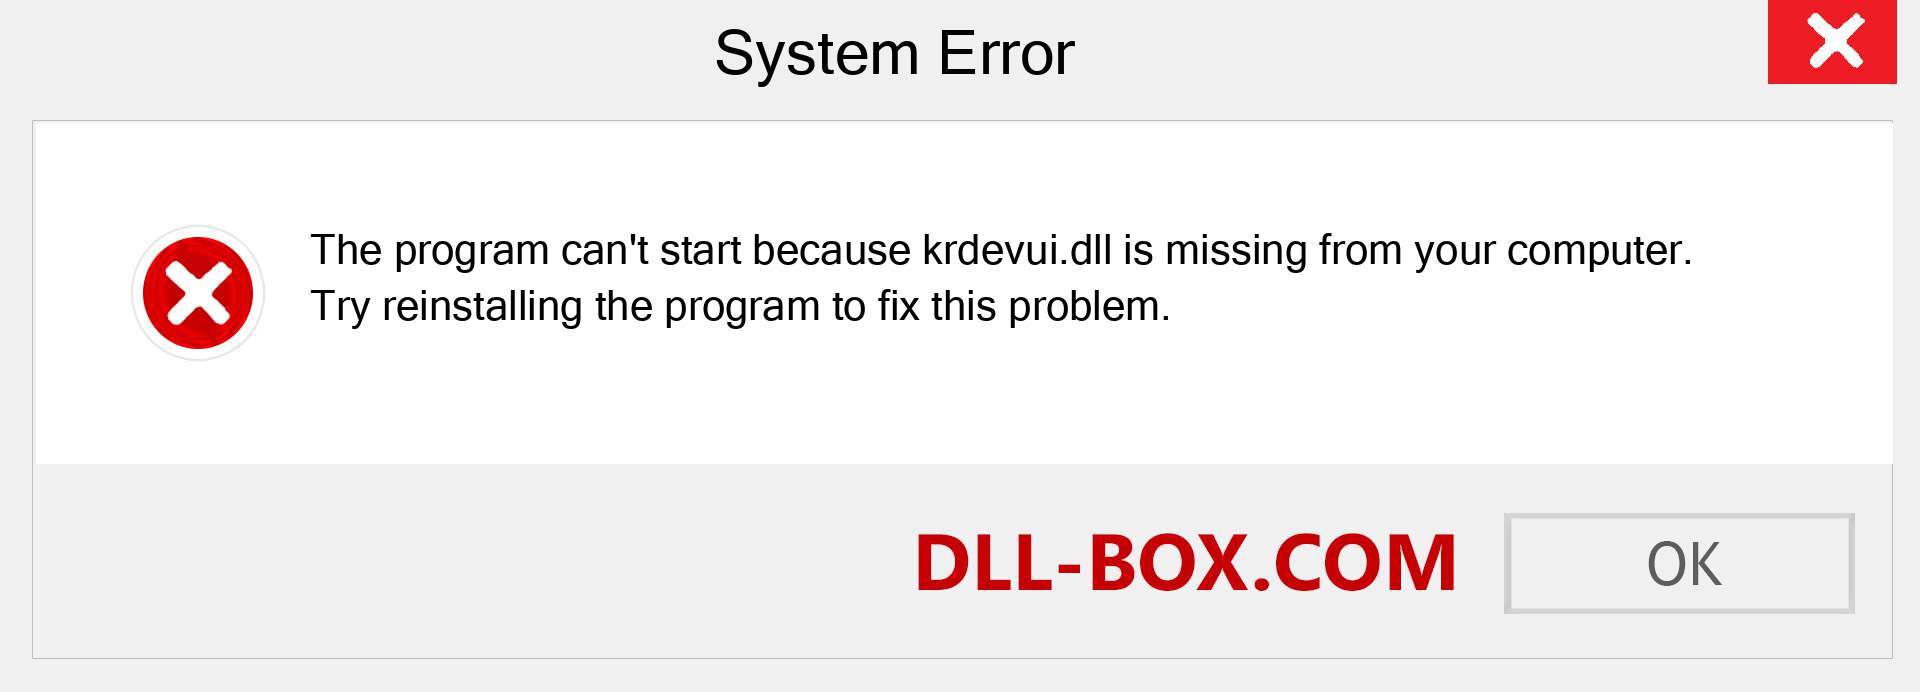  krdevui.dll file is missing?. Download for Windows 7, 8, 10 - Fix  krdevui dll Missing Error on Windows, photos, images